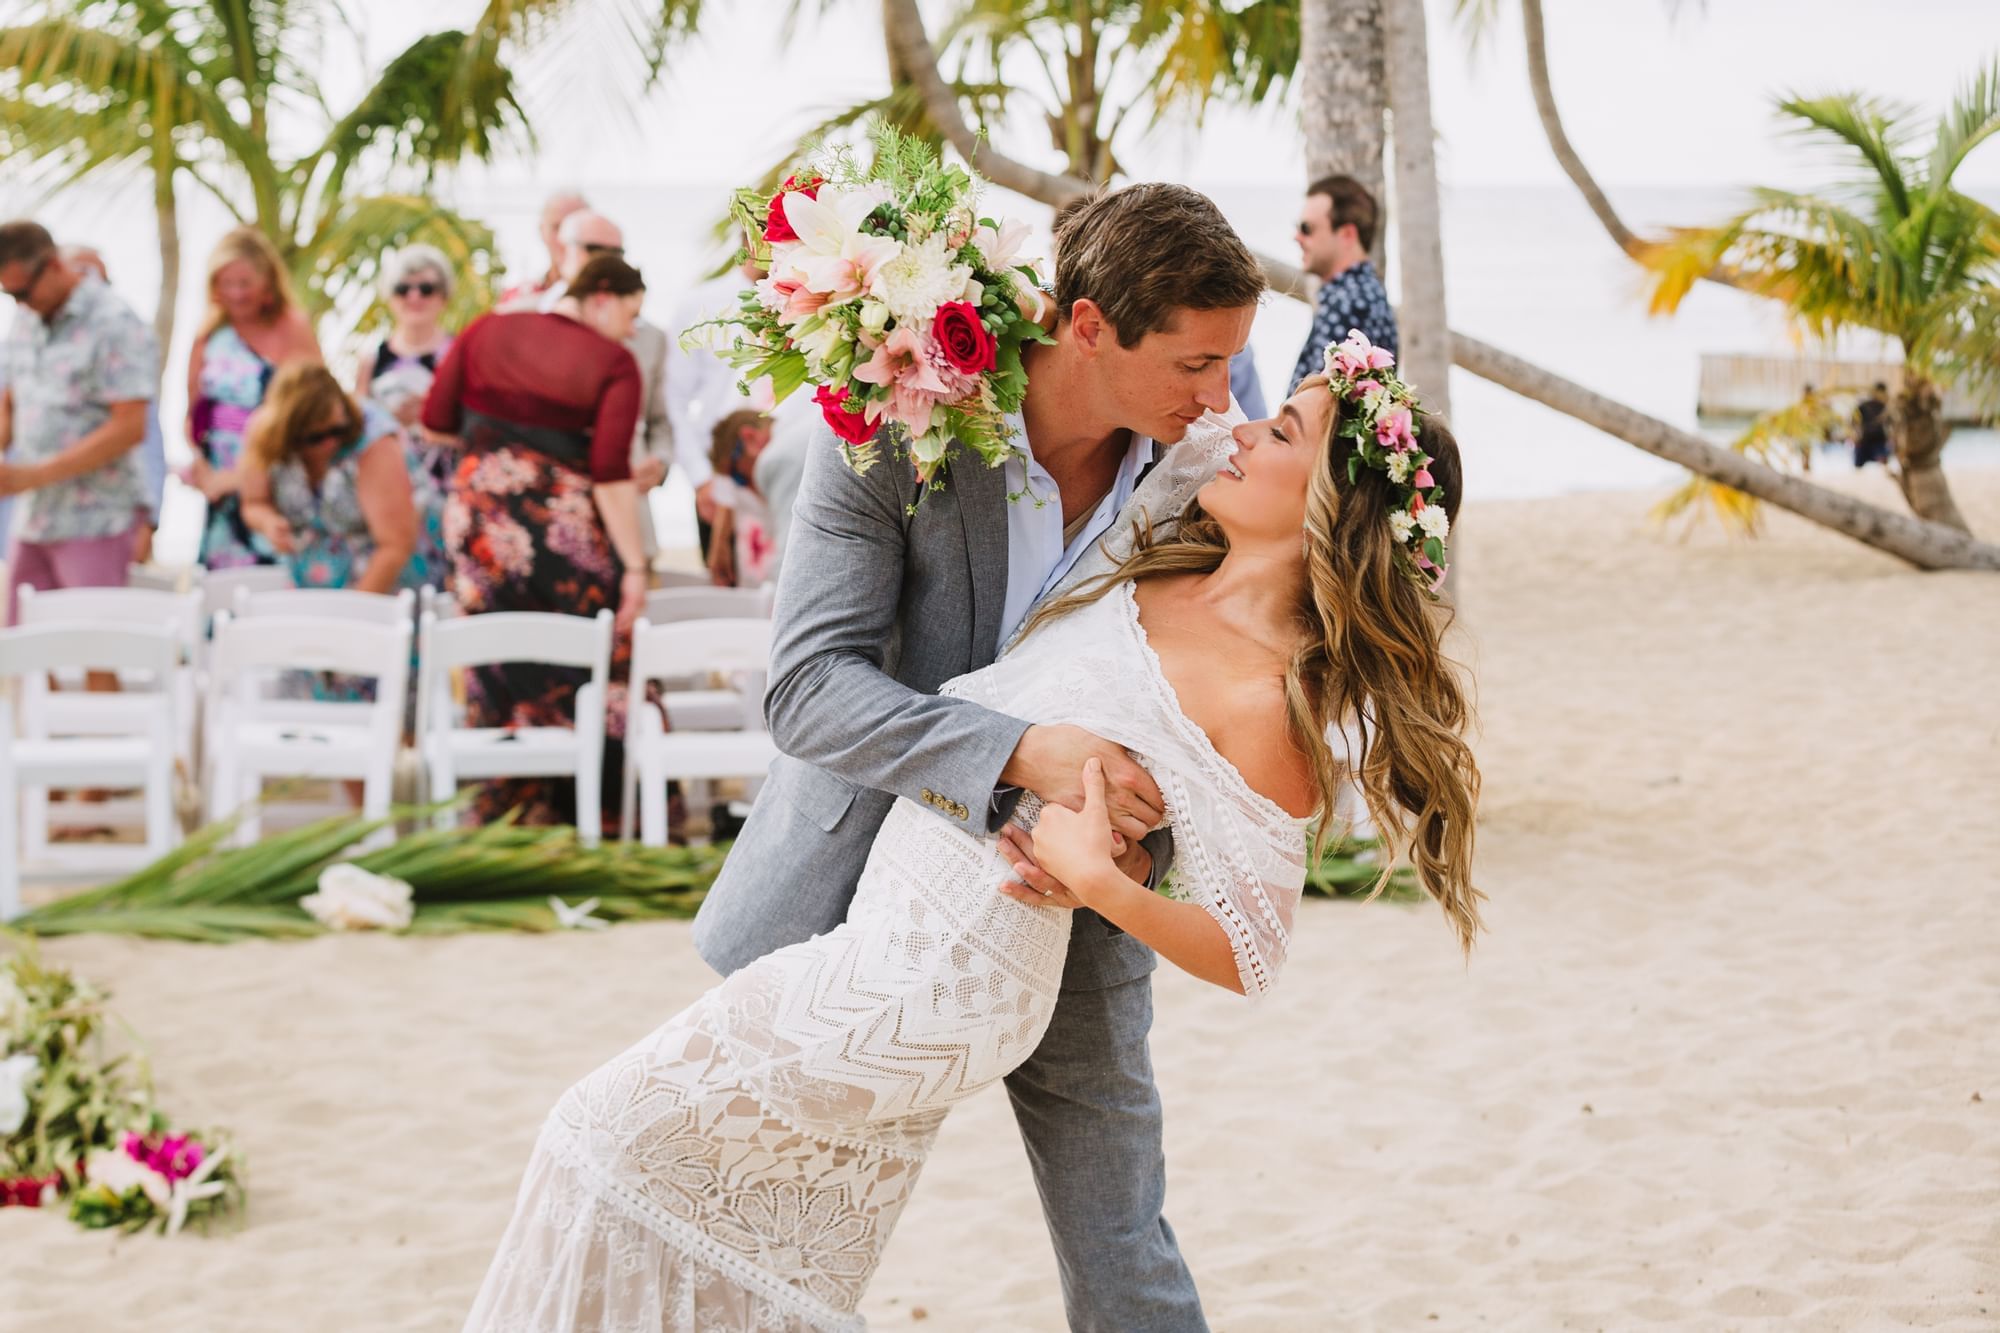 Wedded couple dancing on the beach at The Buccaneer Resort St. Croix